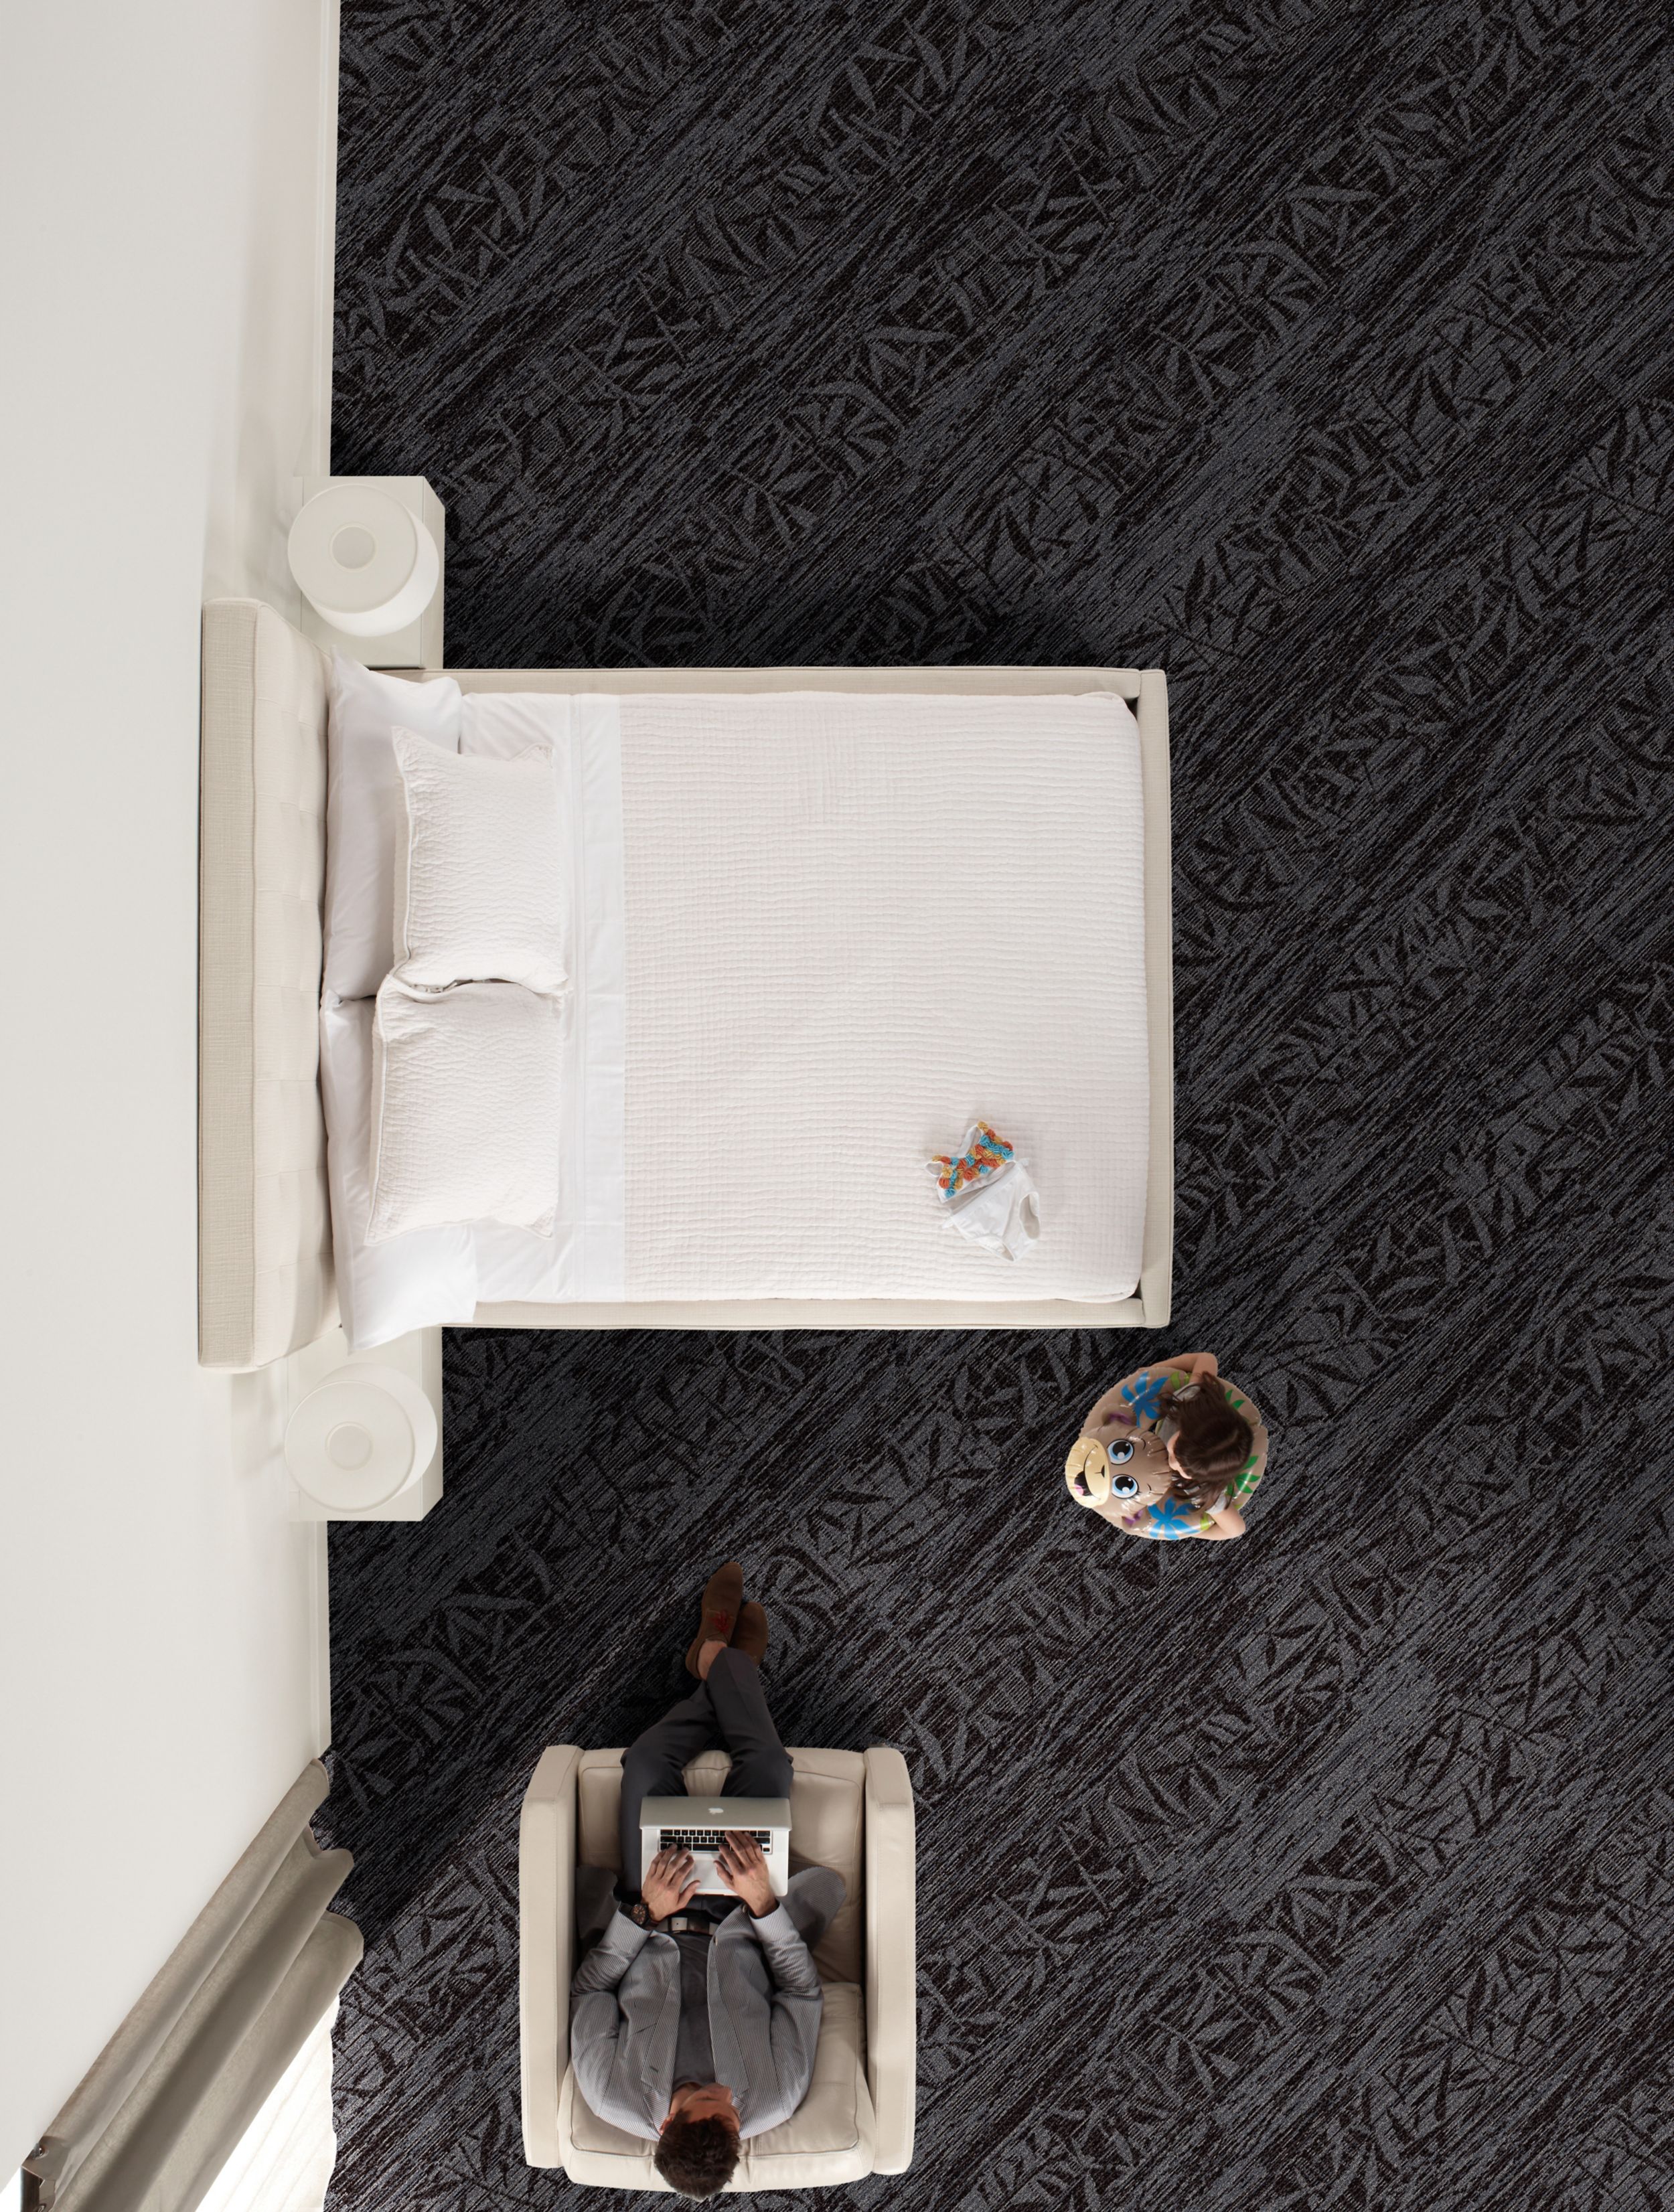 Interface RMS 507 and RMS 508 plank carpet tile in hotel guest room with woman on computer and girl holding stuffed animal imagen número 3